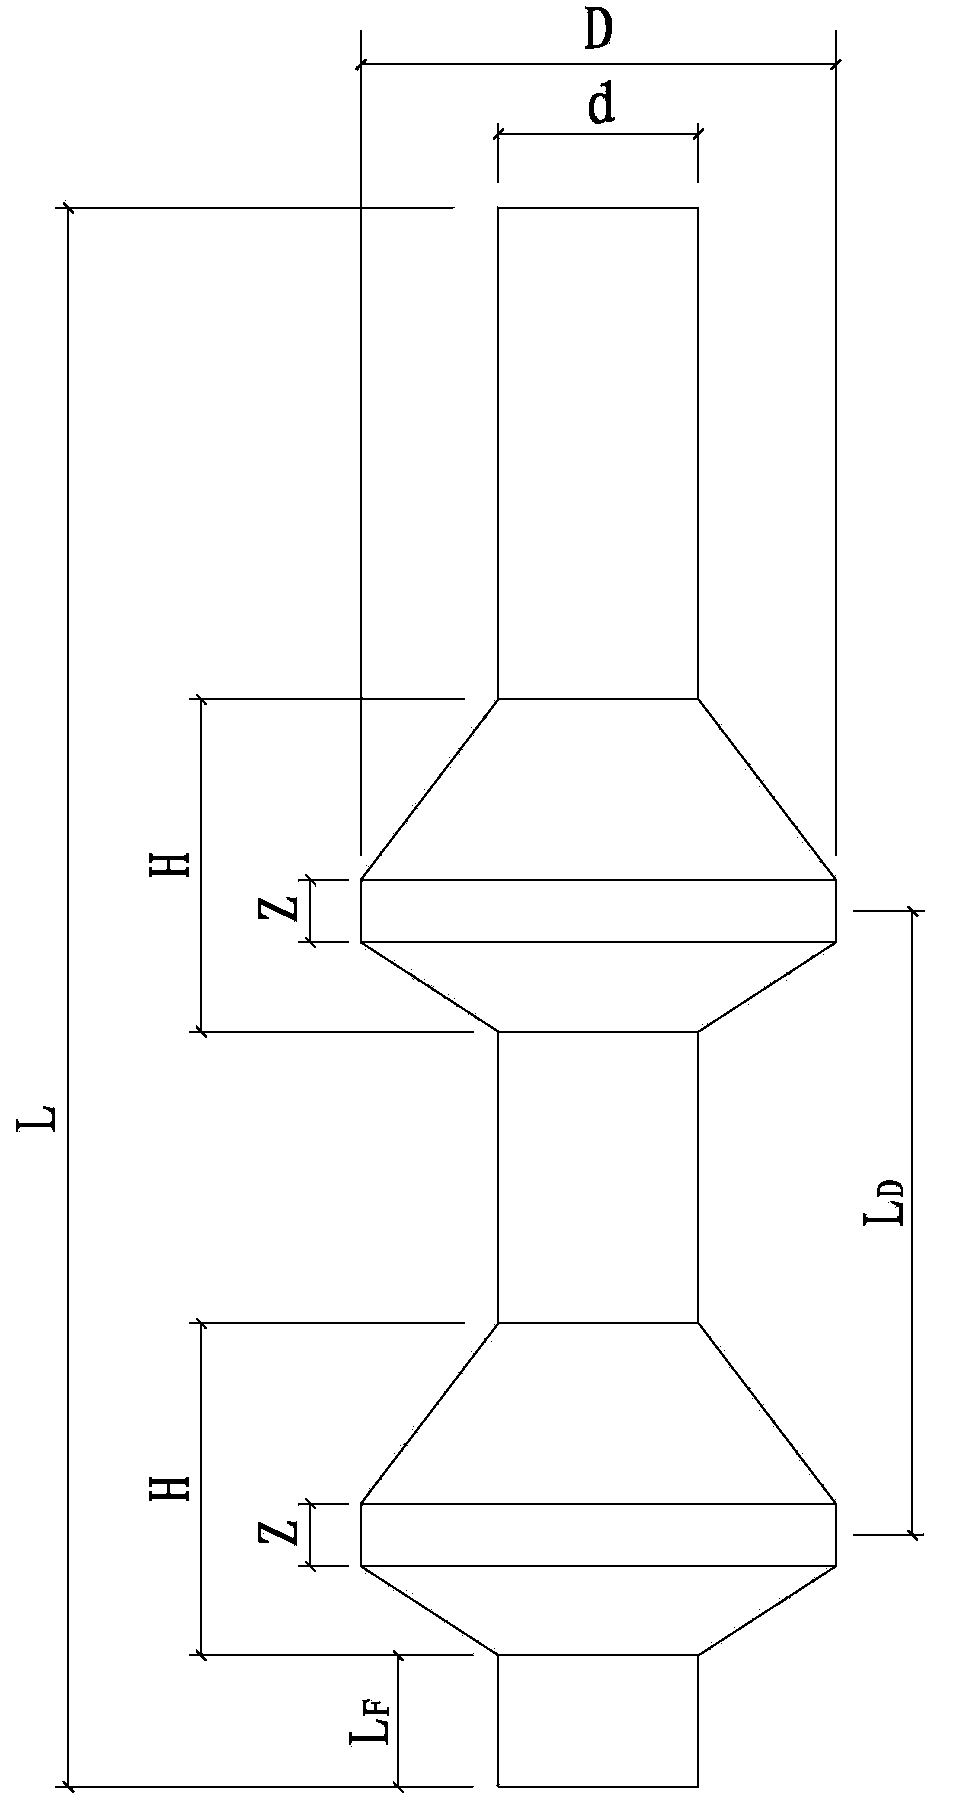 Multi-section reaming cast-in-place pile construction method